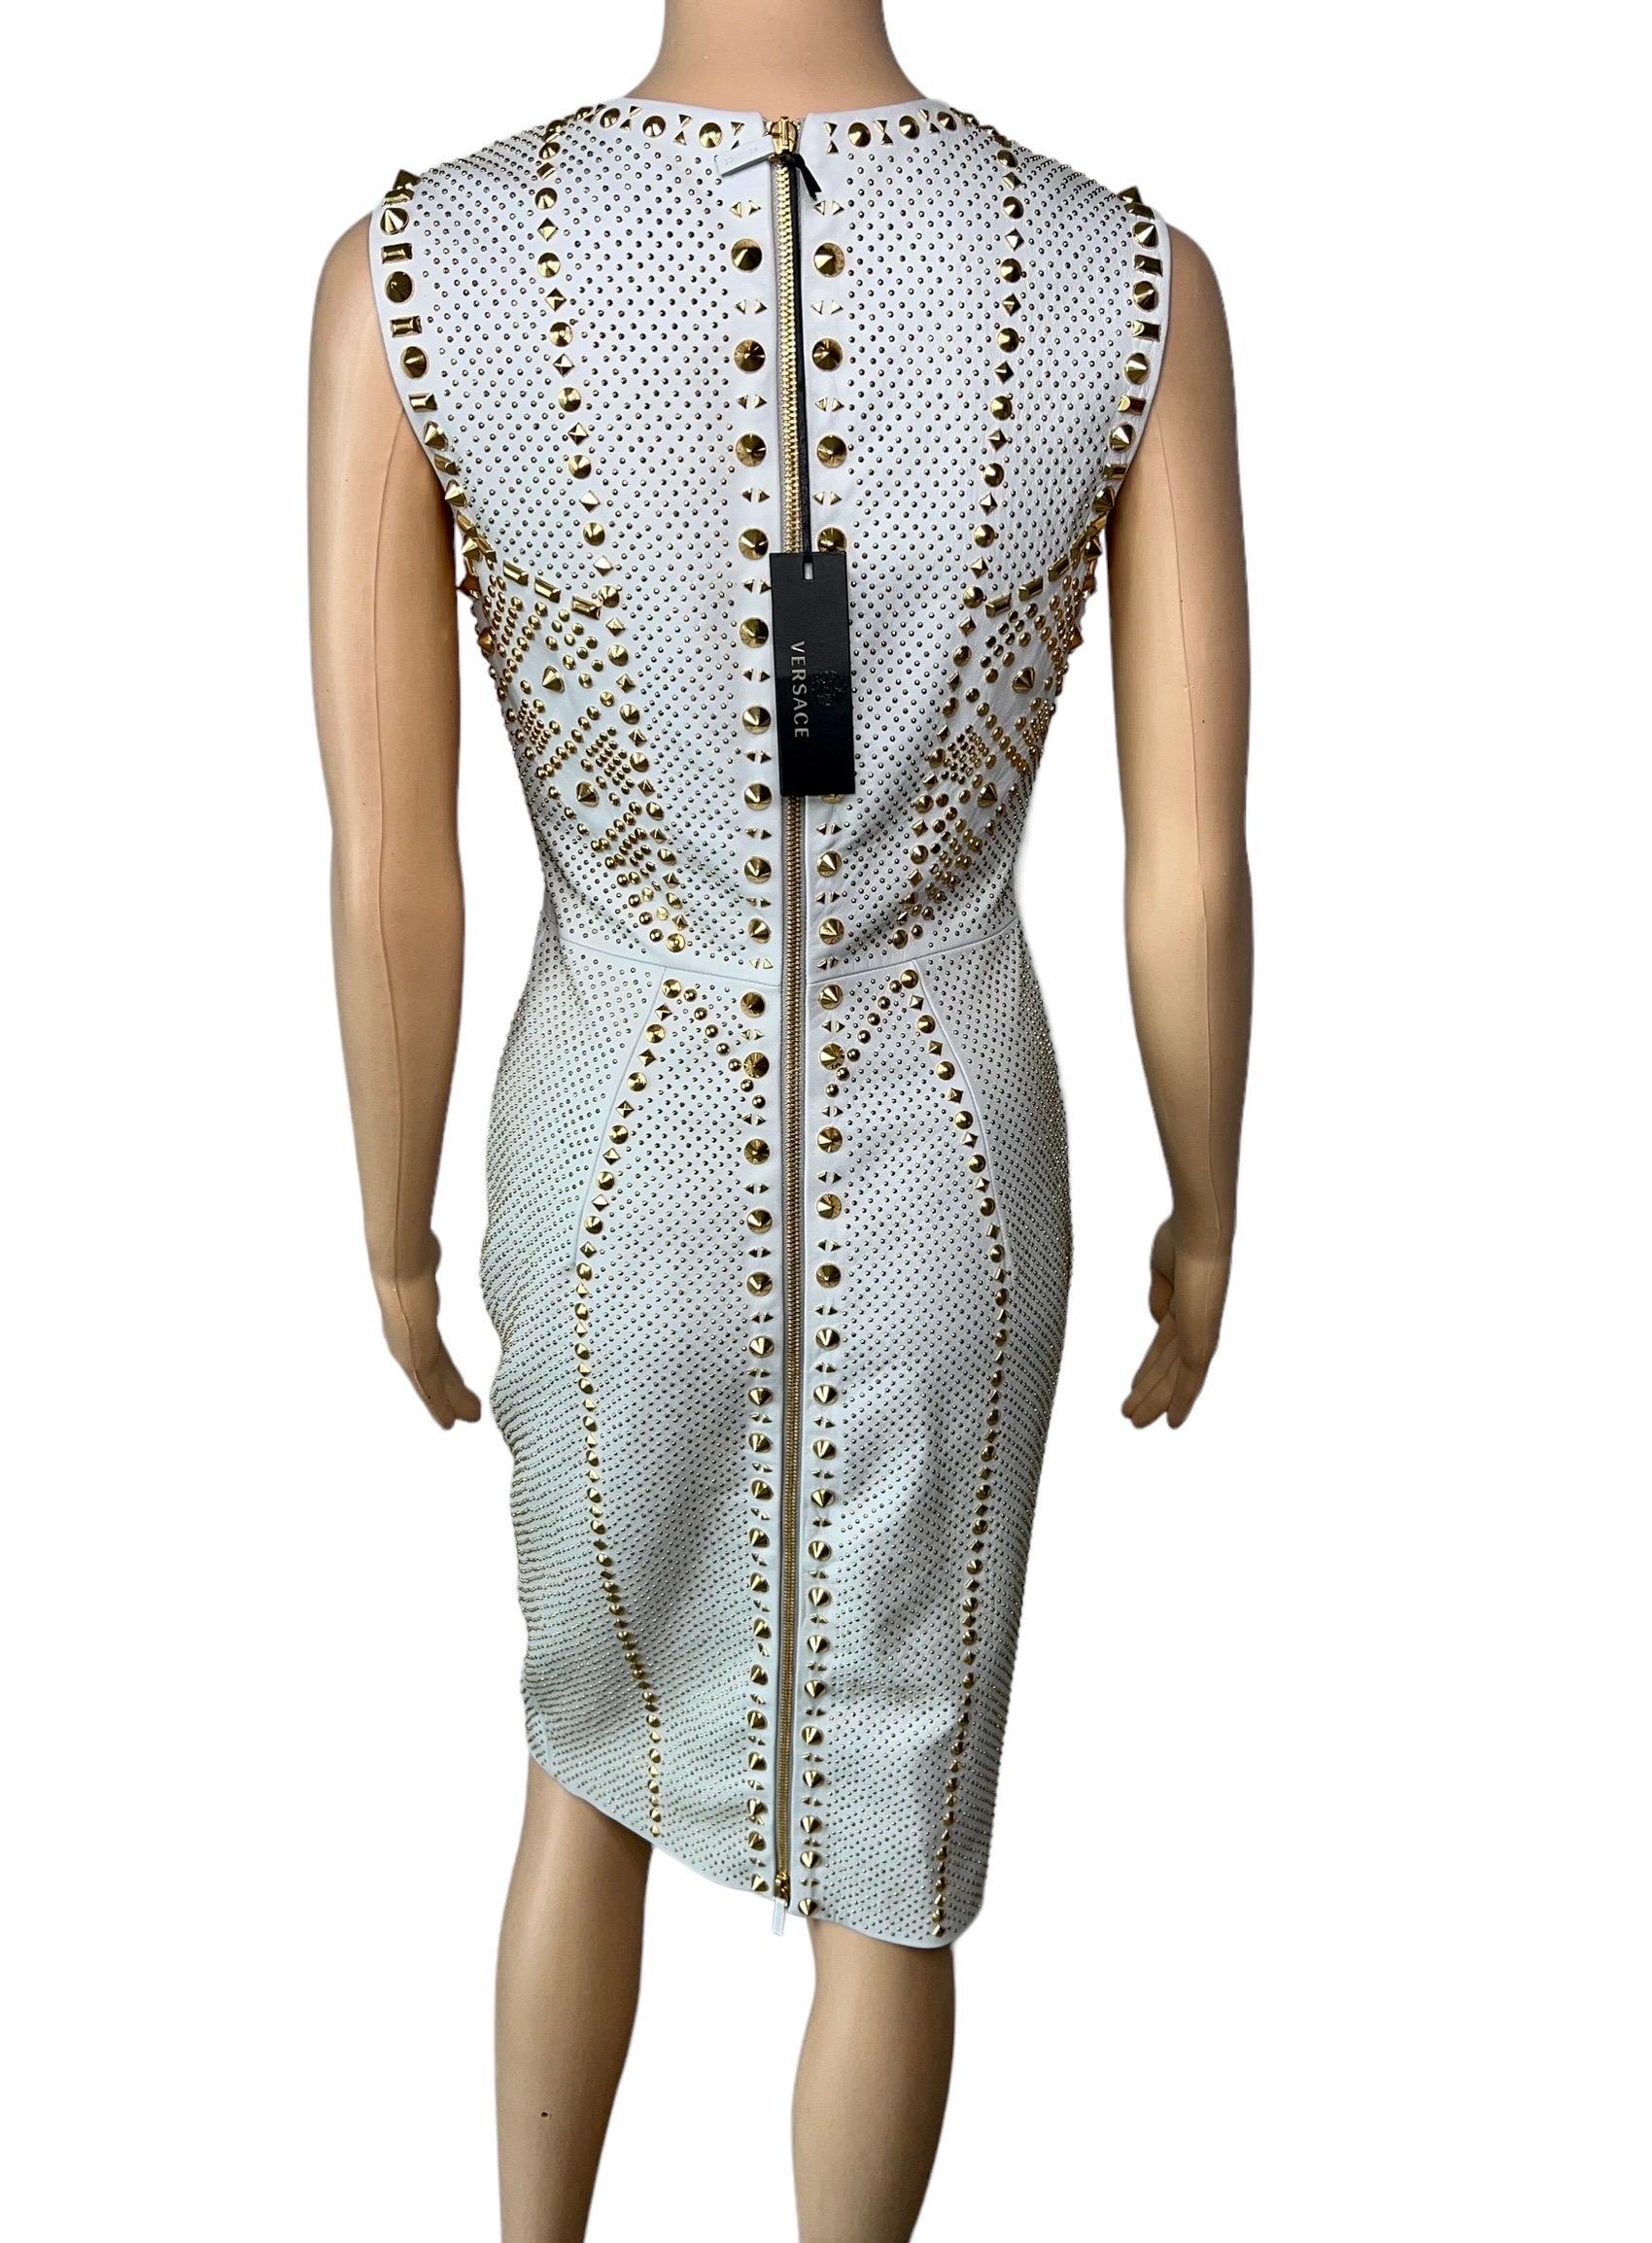 Versace S/S 2012 Runway Unworn Embellished Gold Studded Leather Dress  In Excellent Condition For Sale In Naples, FL